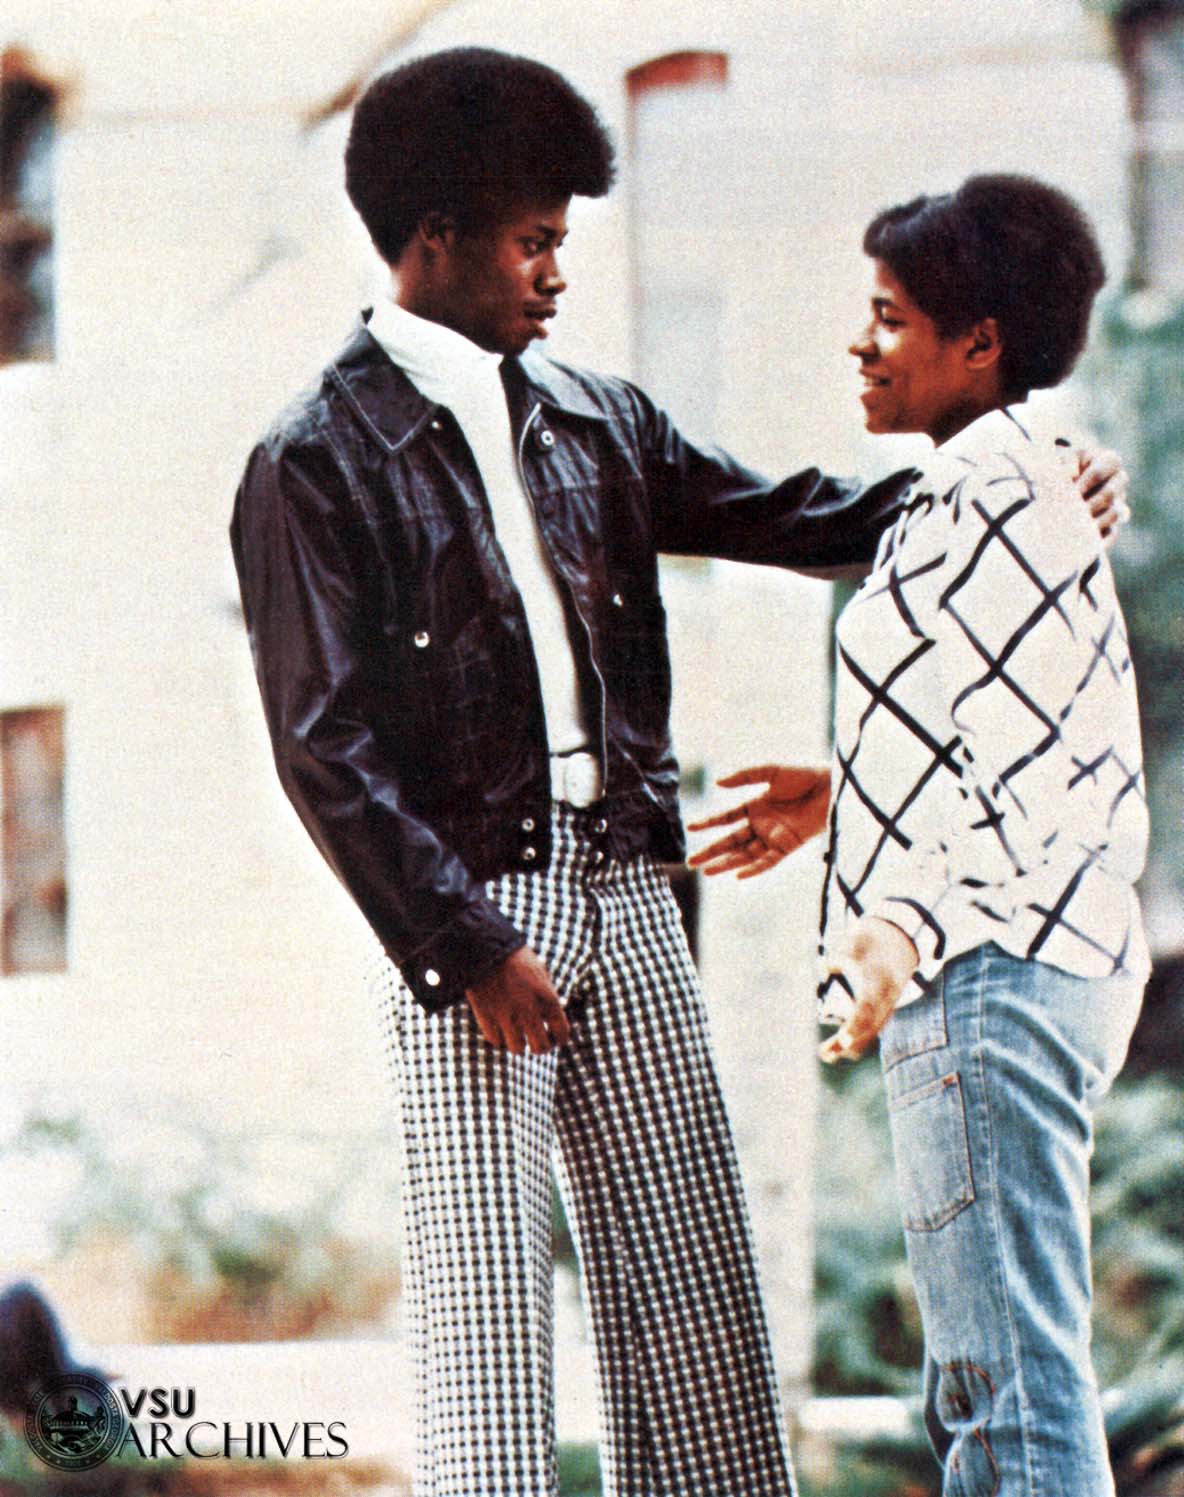 1976, Students on Campus